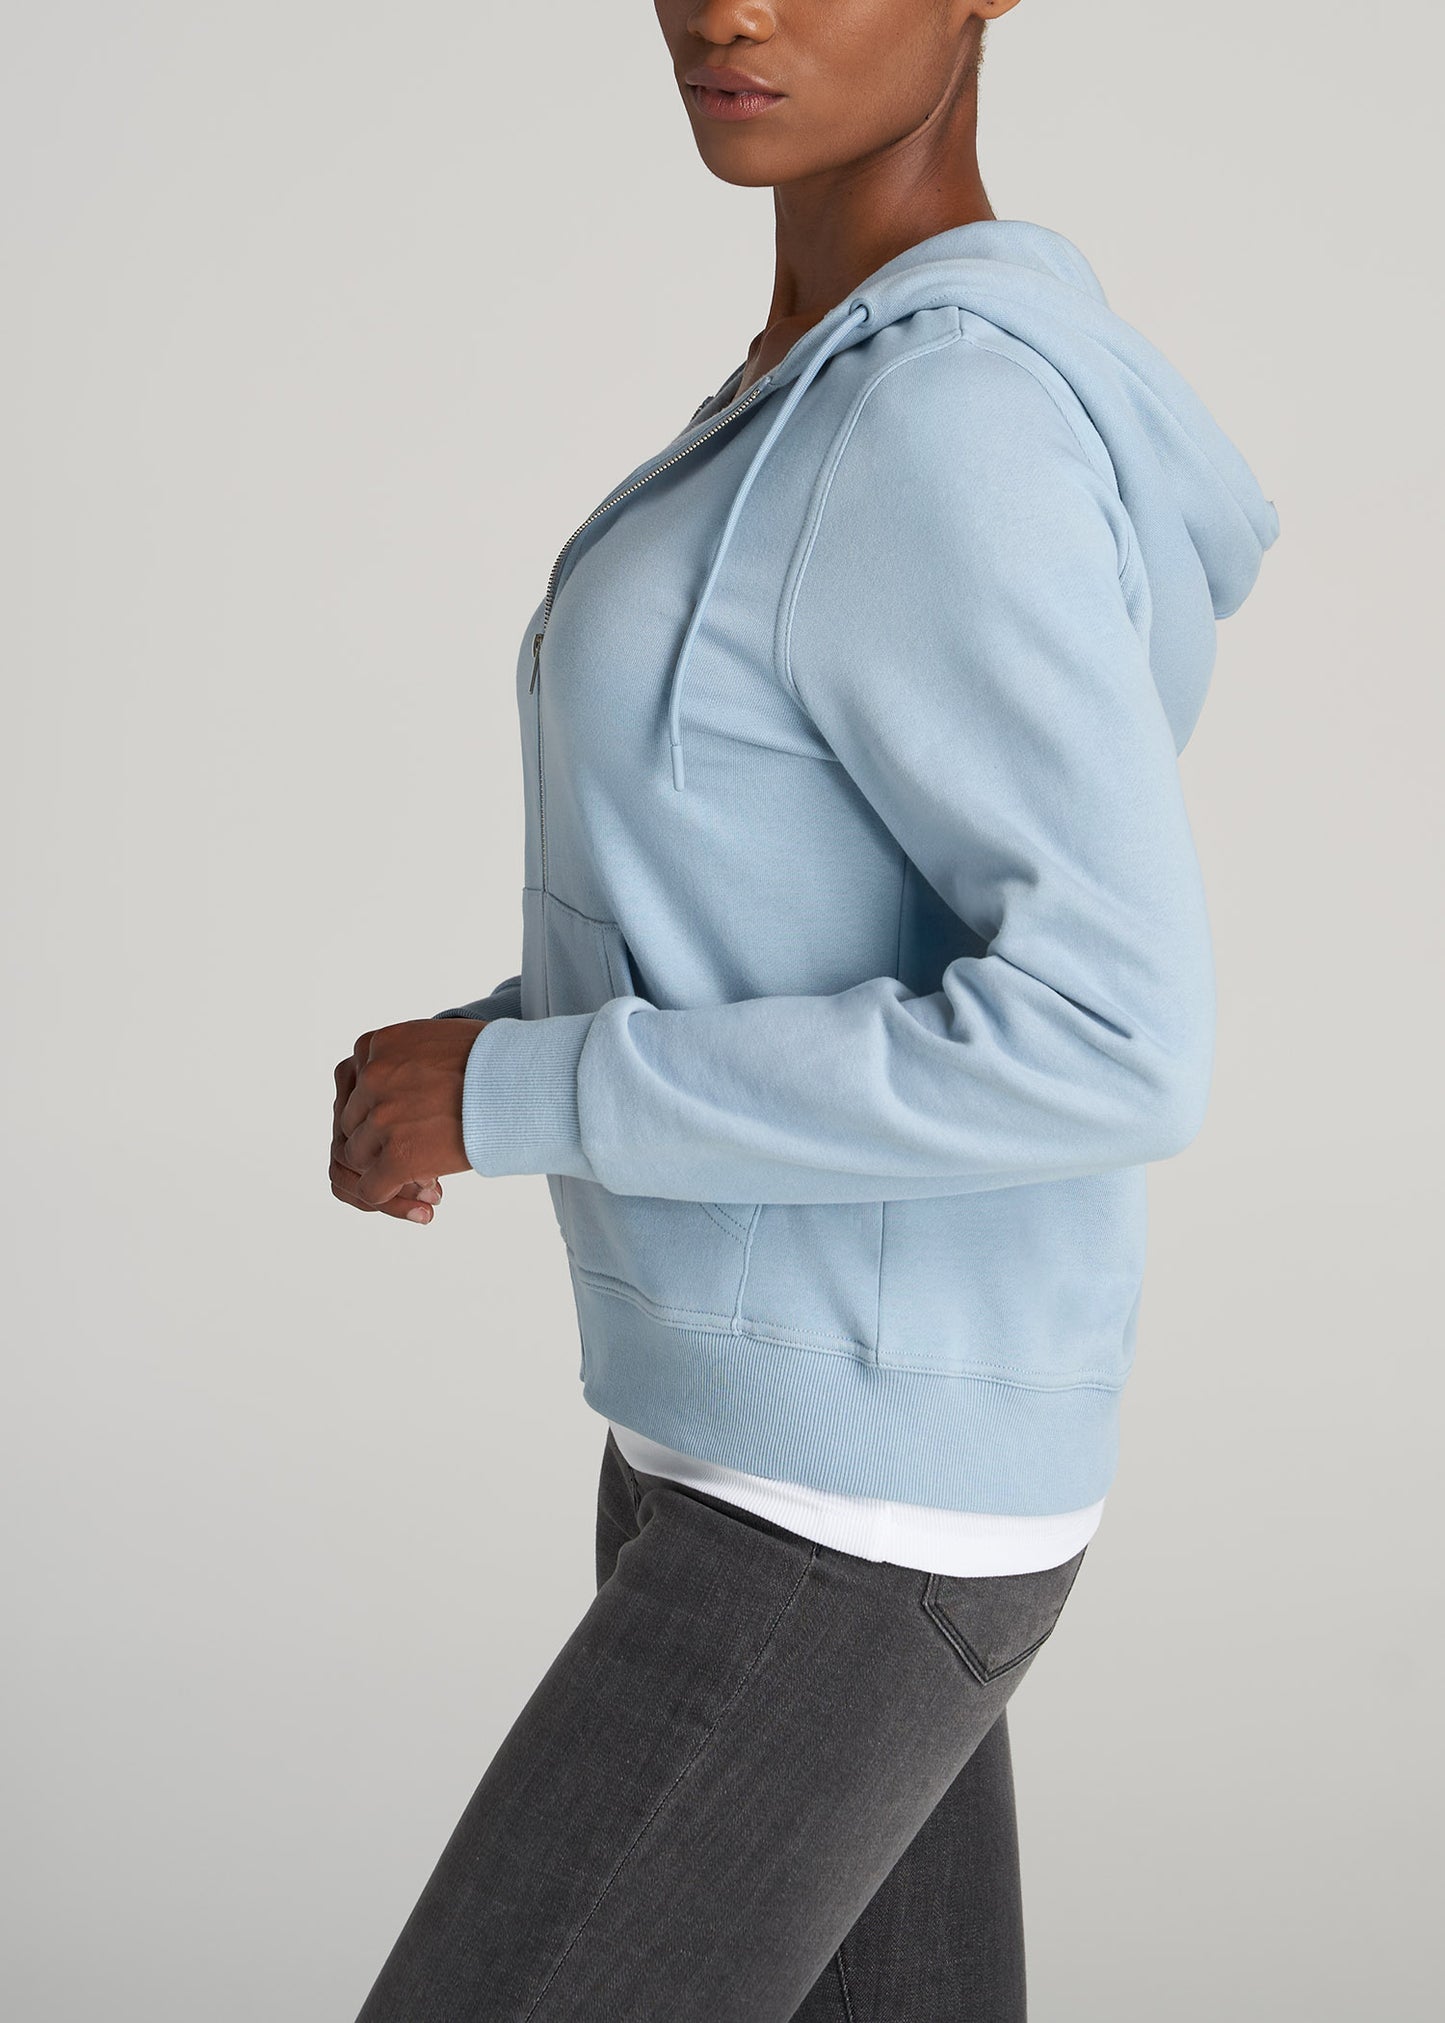         American-Tall-Women-WKND-Full-Zip-Hoodie-Partly-Cloudy-side